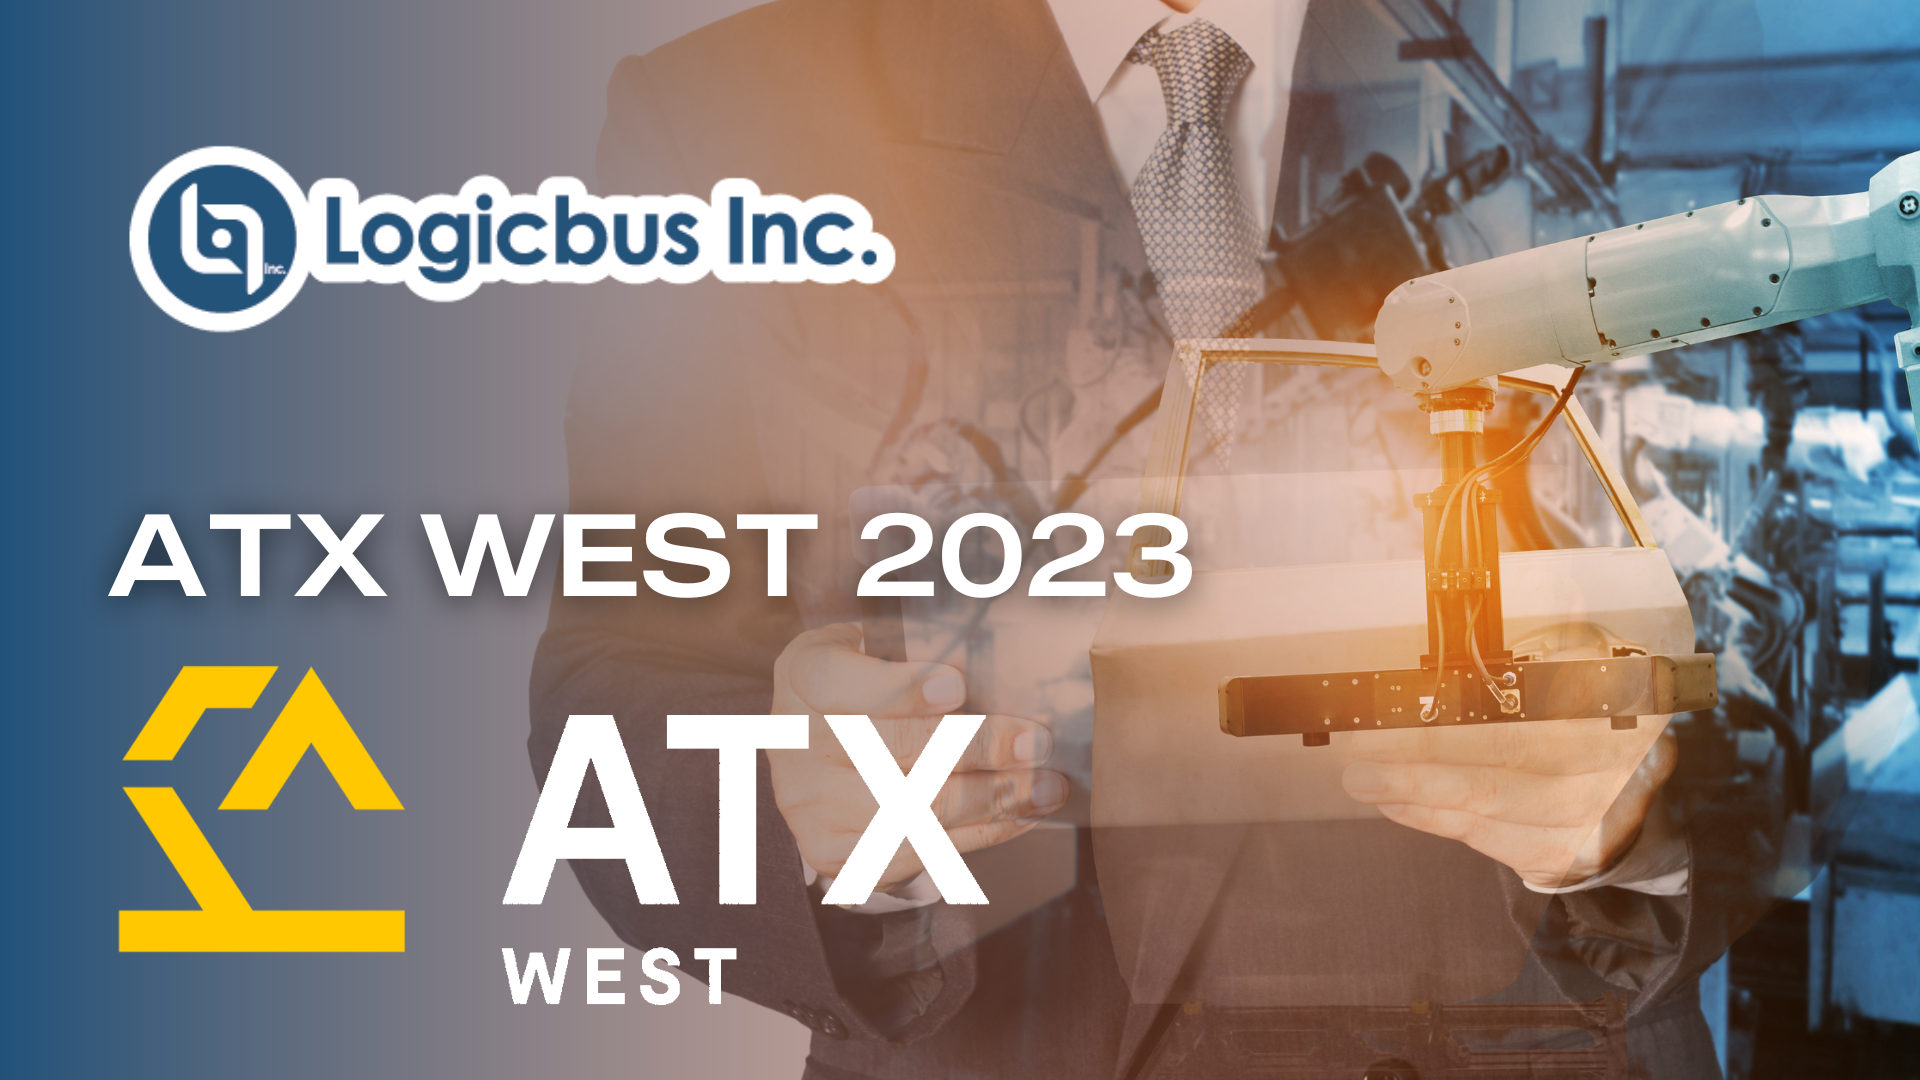 LOGICBUS AT ATX WEST 2023